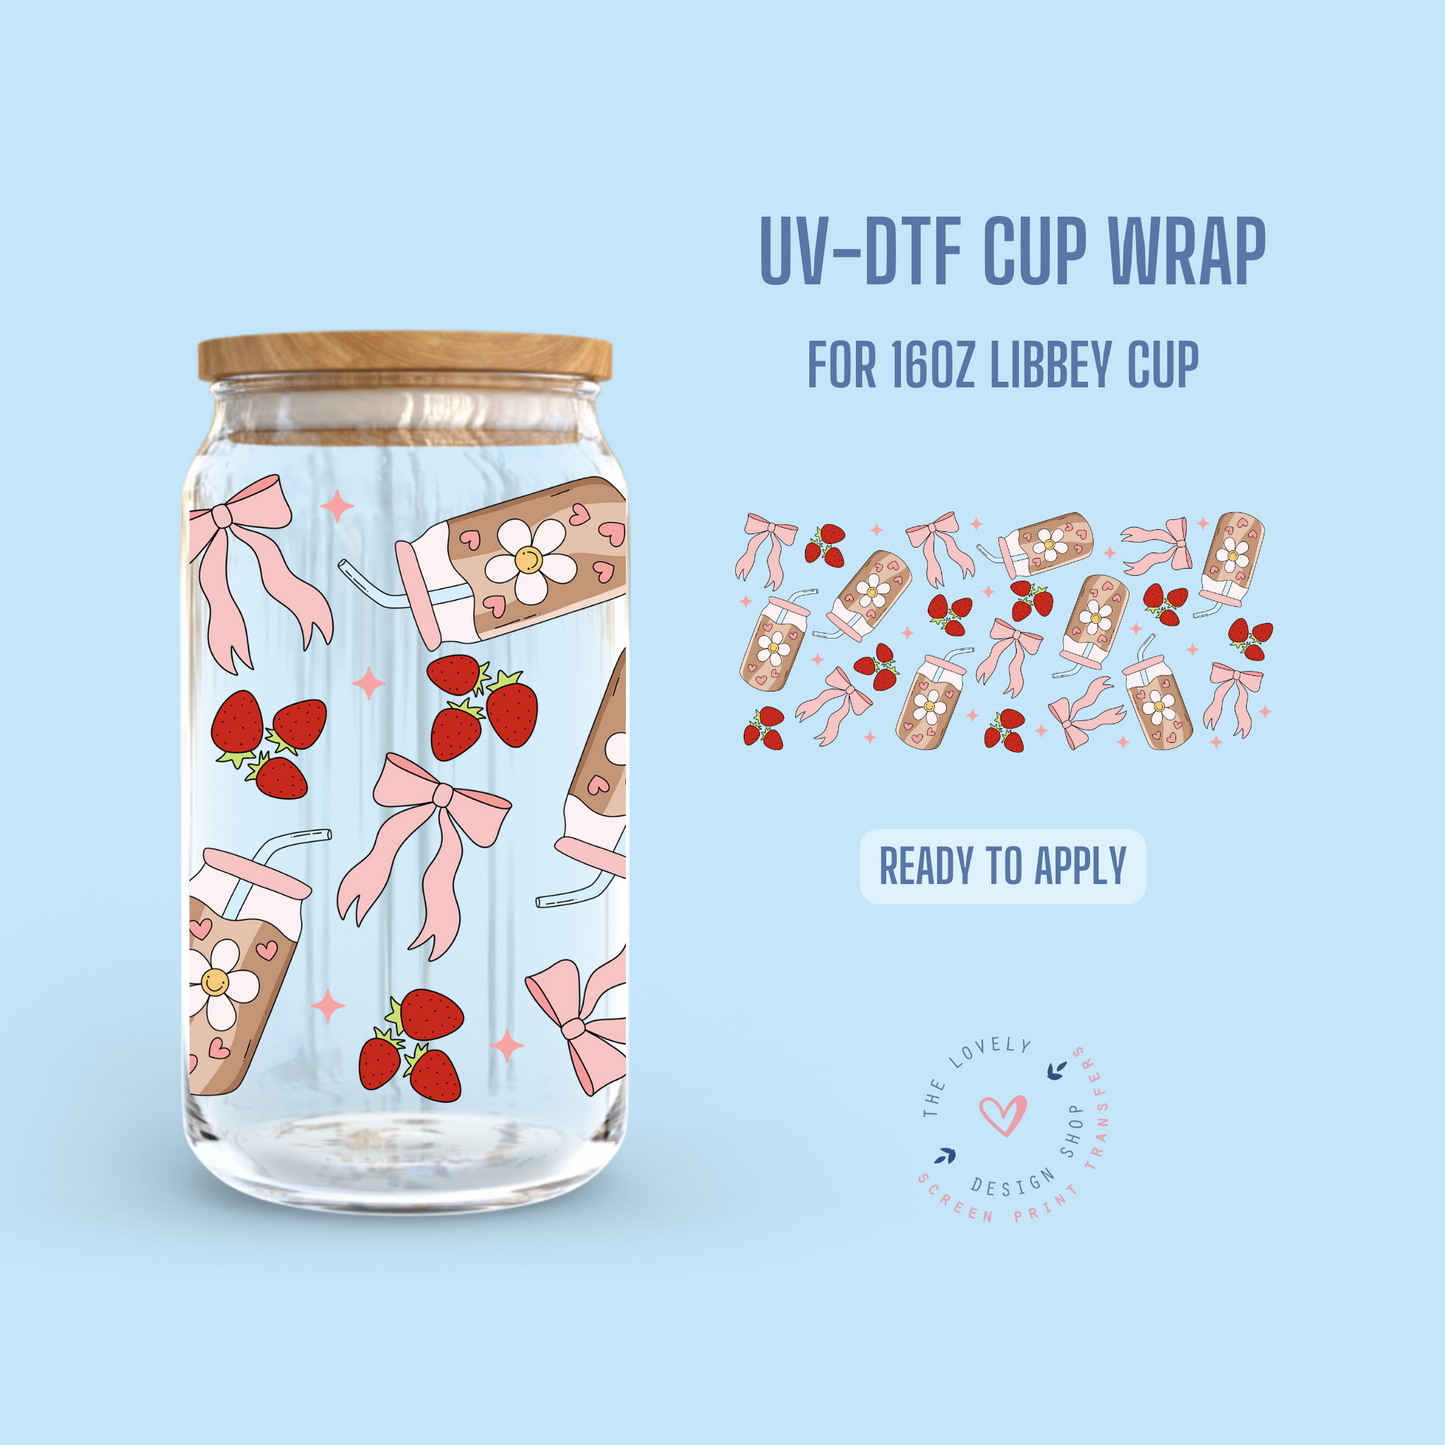 Coffee Bow and Strawberries - UV DTF 16 oz Libbey Cup Wrap (Ready to Ship) Mar 11